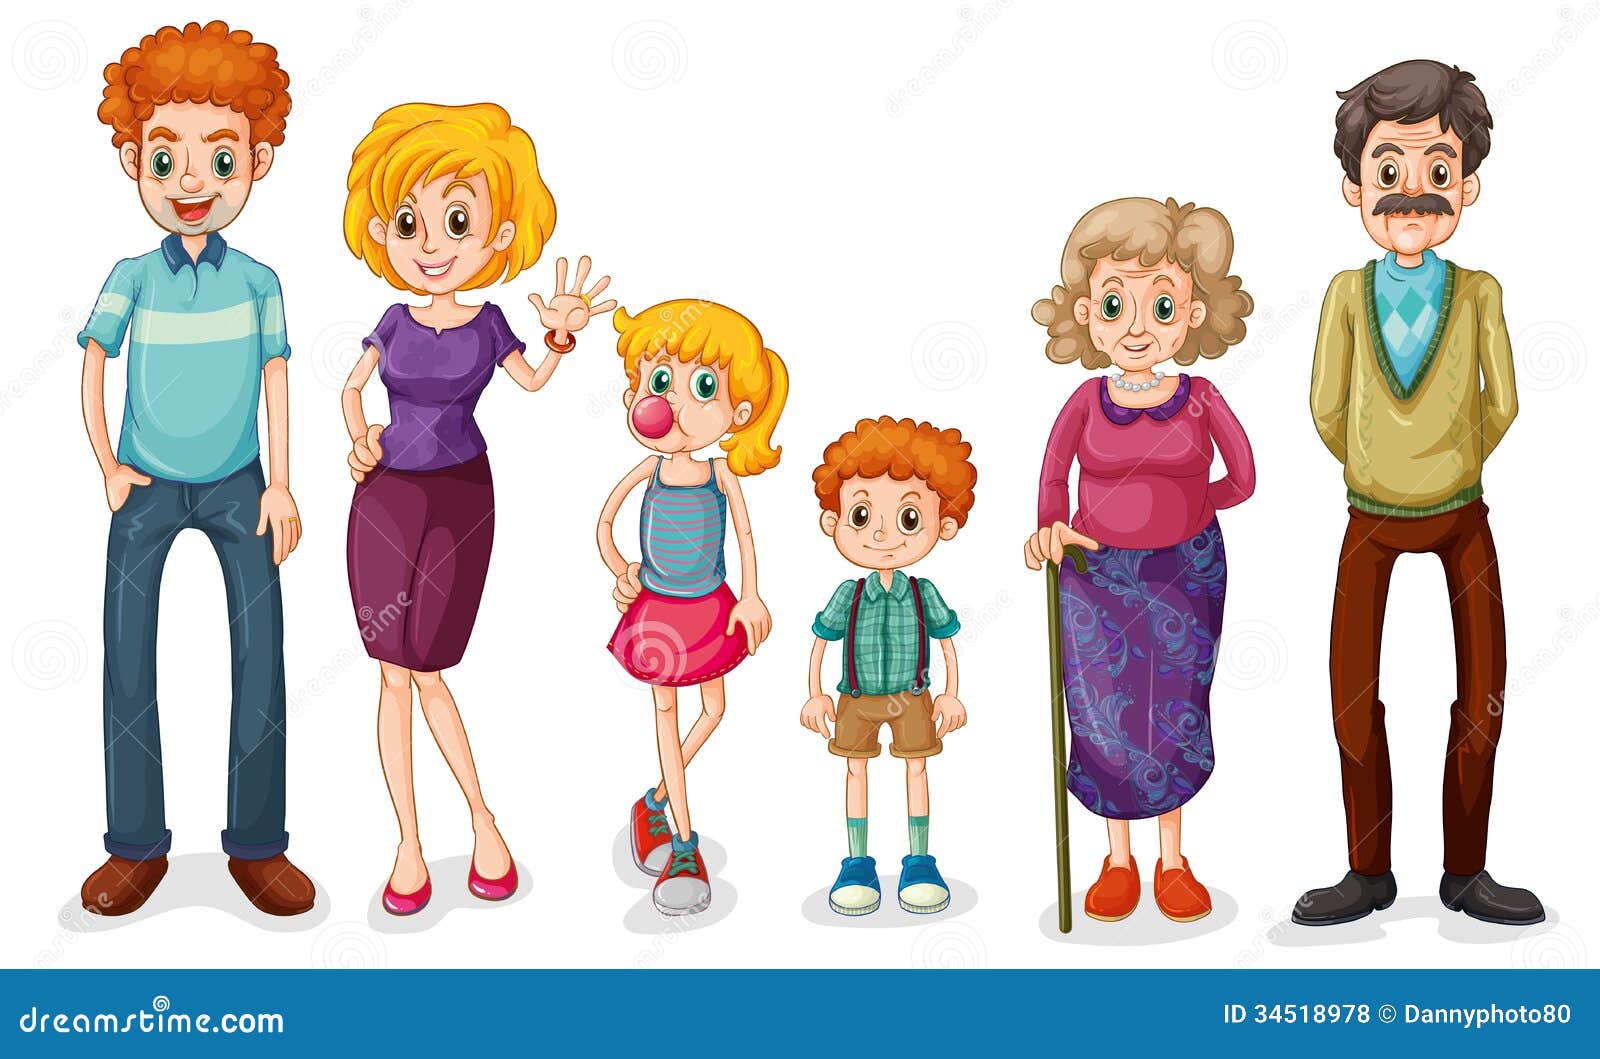 extended family clipart - photo #41